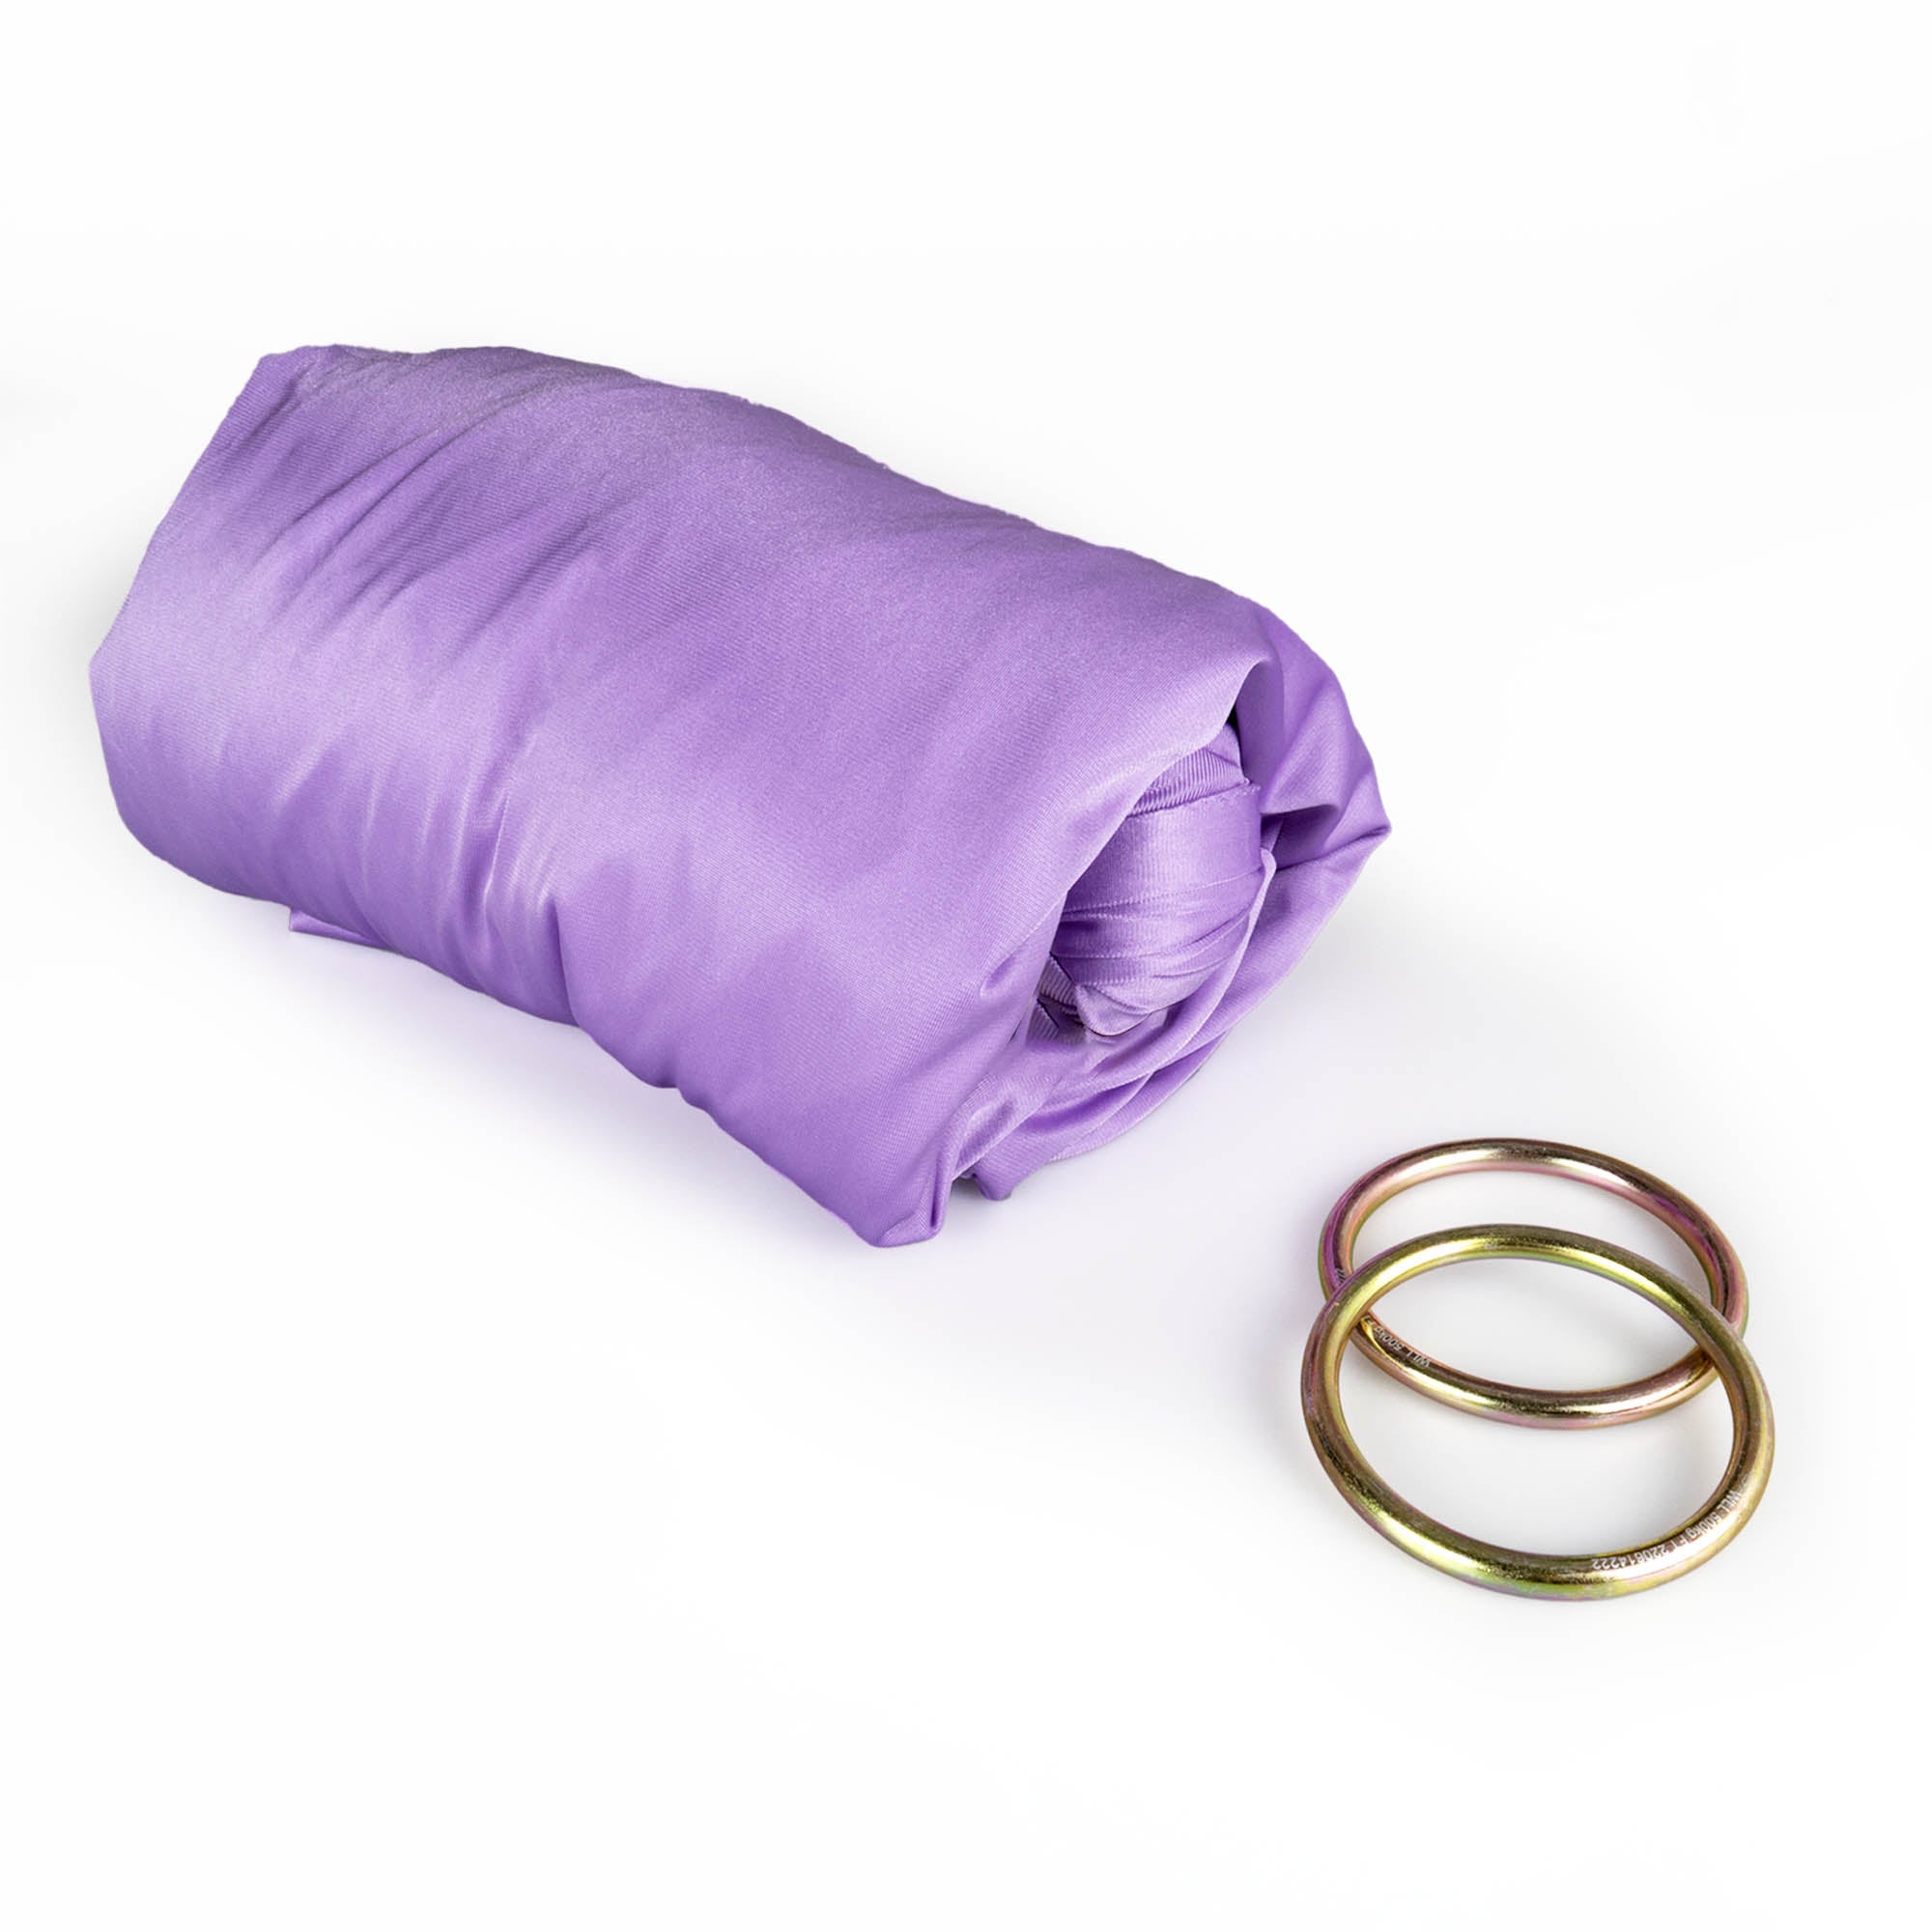 Lavender yoga hammock rolled up with rings detached